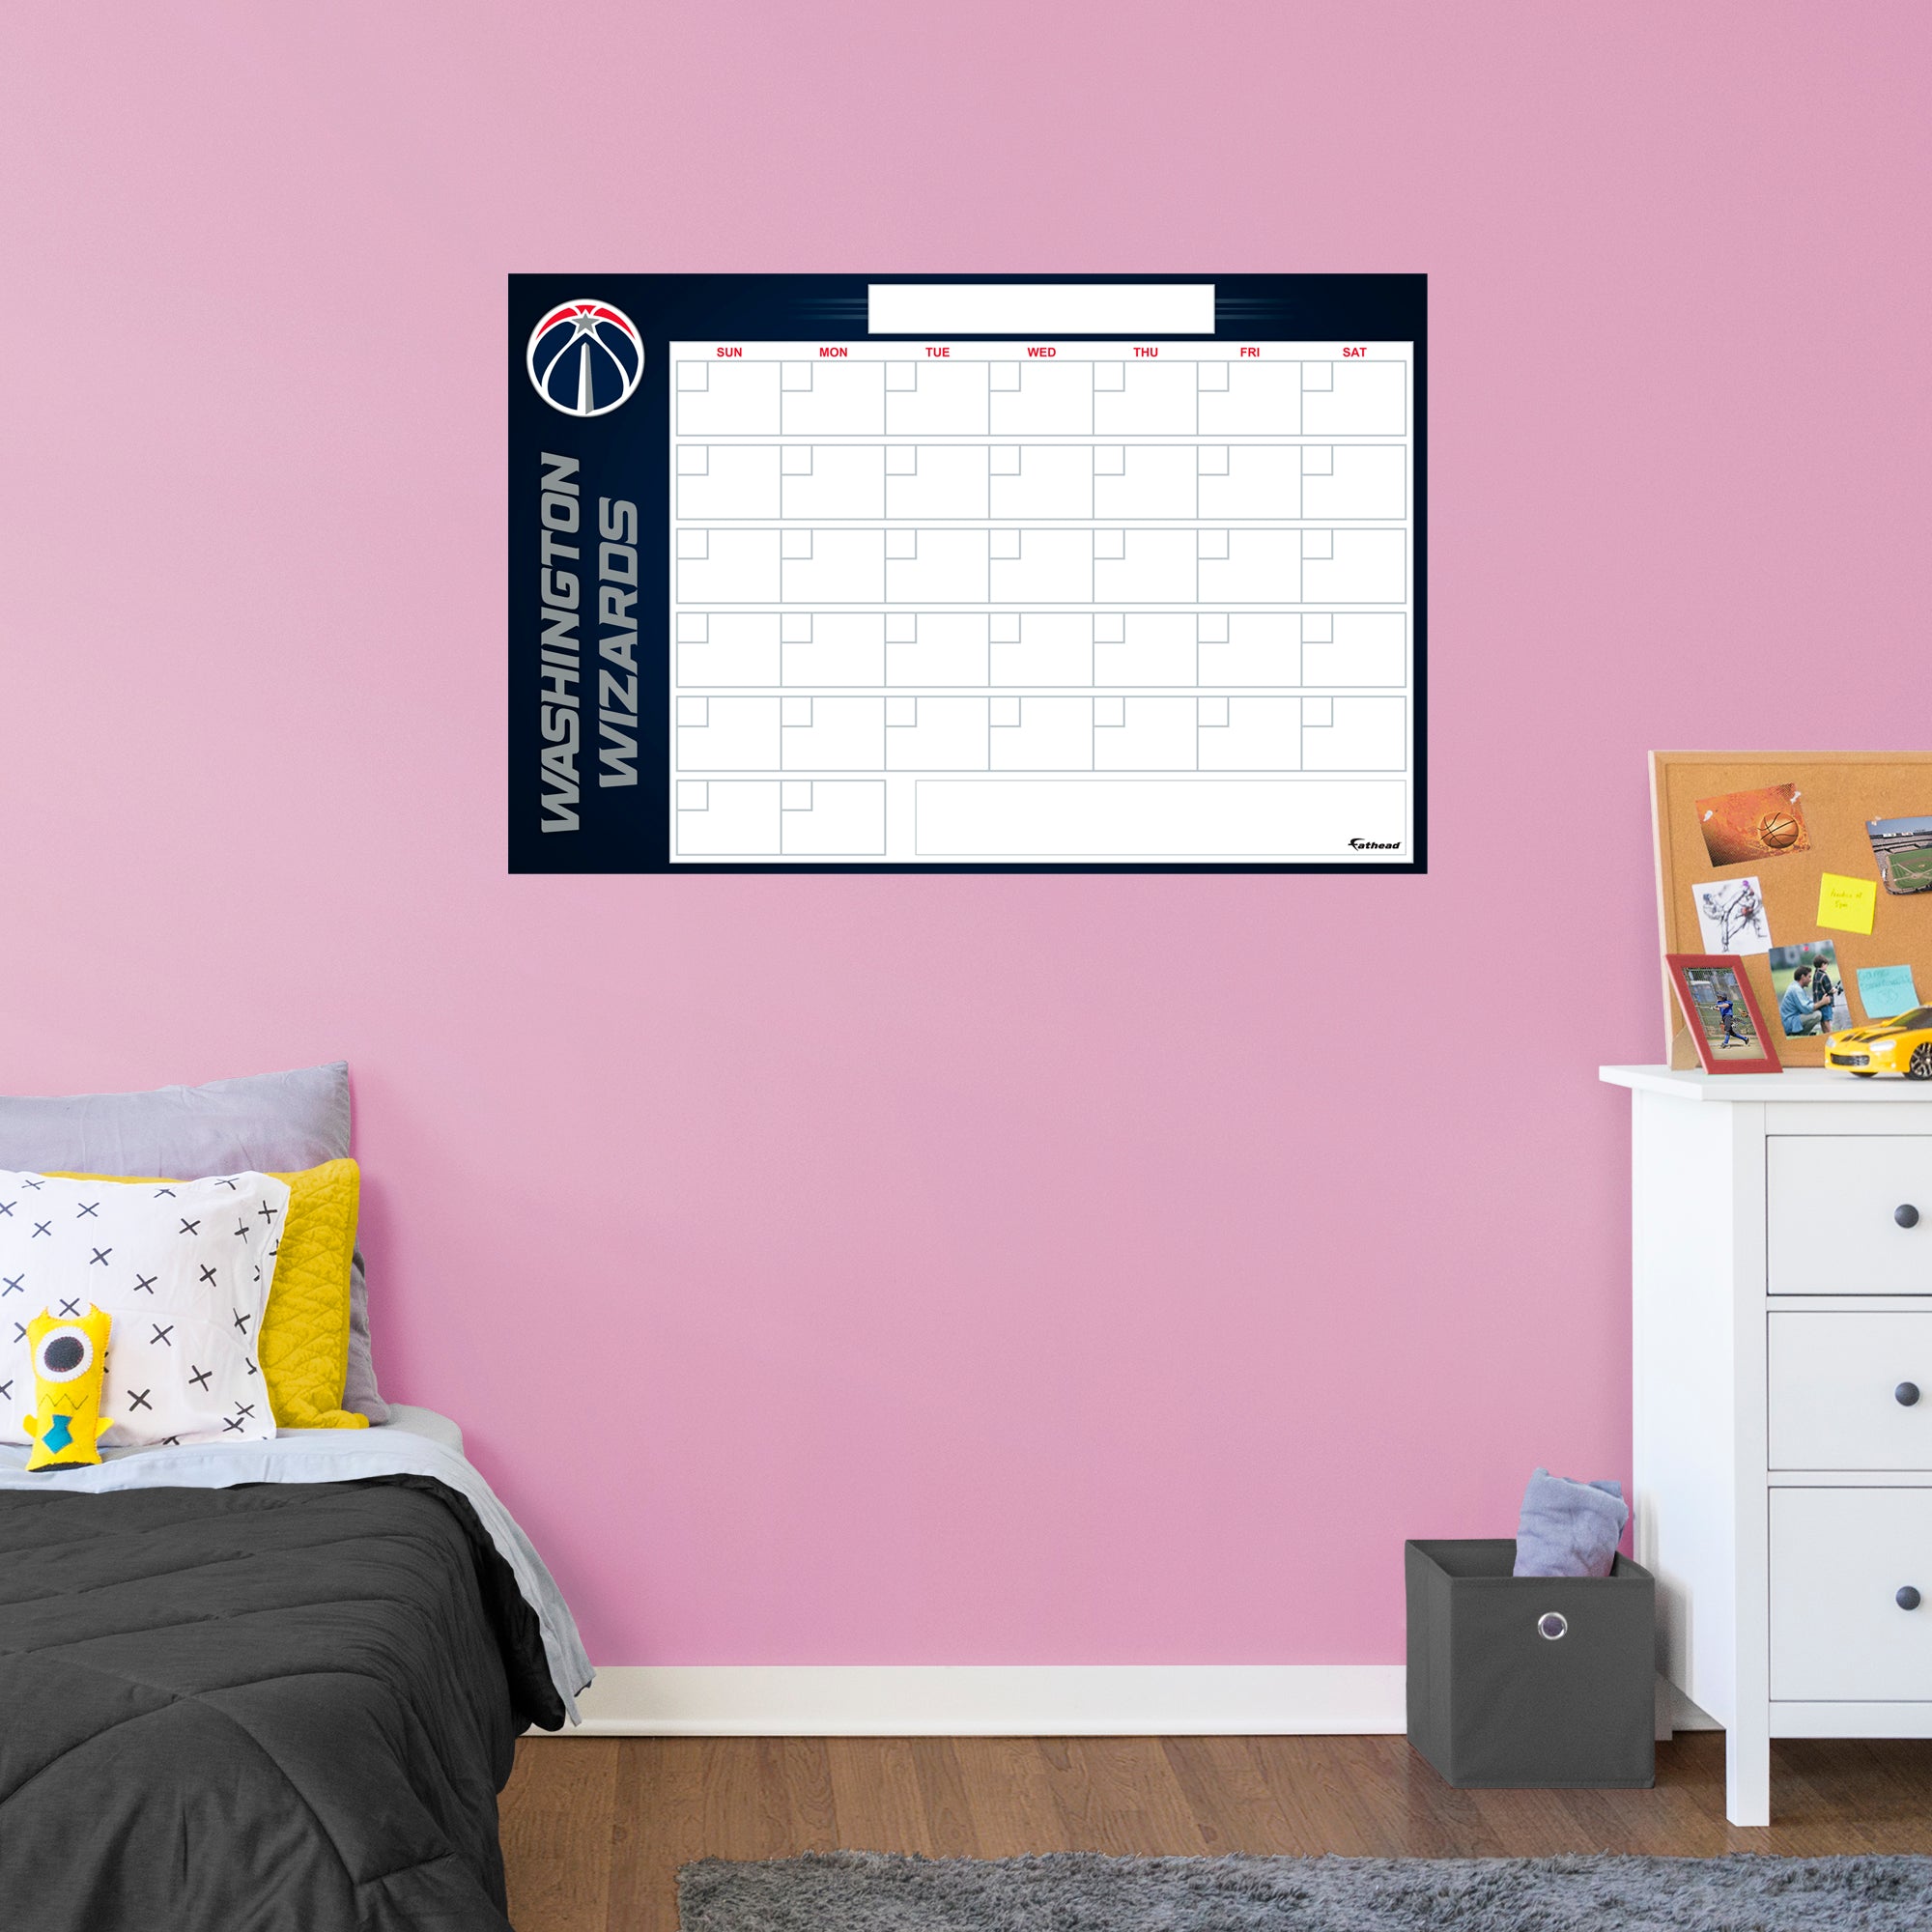 Washington Wizards Dry Erase Calendar - Officially Licensed NBA Removable Wall Decal Giant Decal (34"W x 52"H) by Fathead | Viny